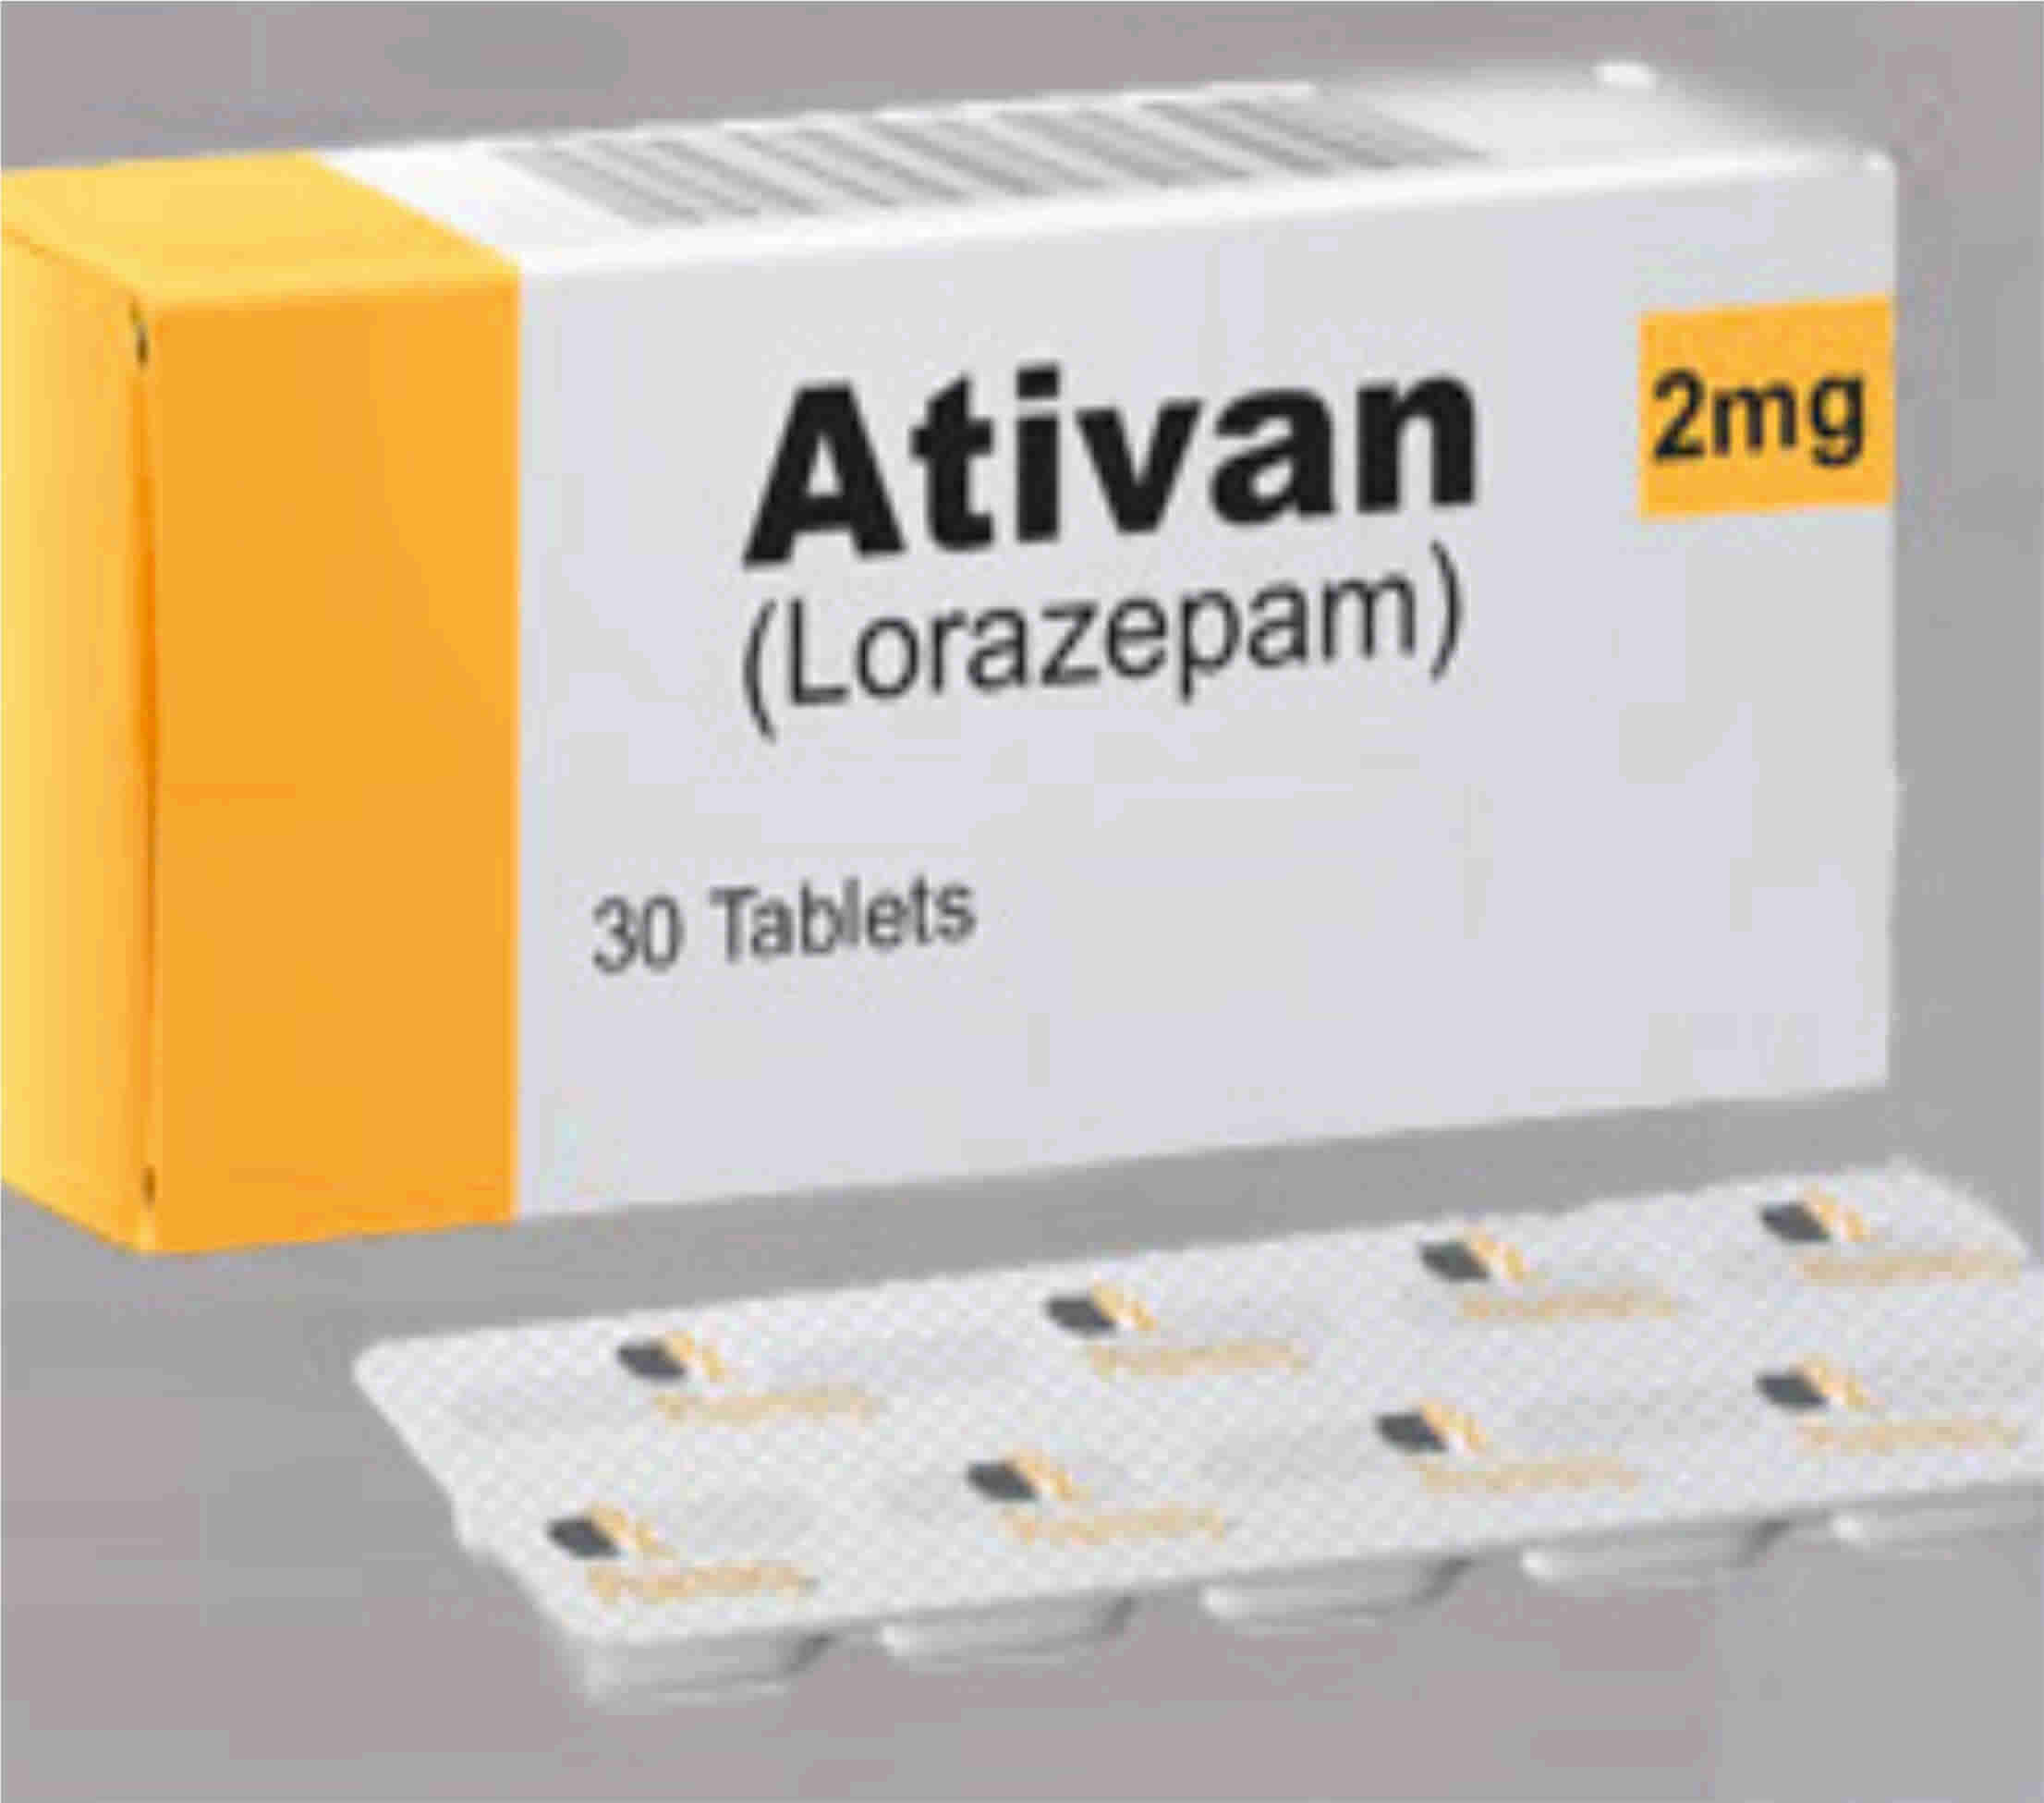 lorazepam-uses-side-effects-abuse-addiction-meds-safety